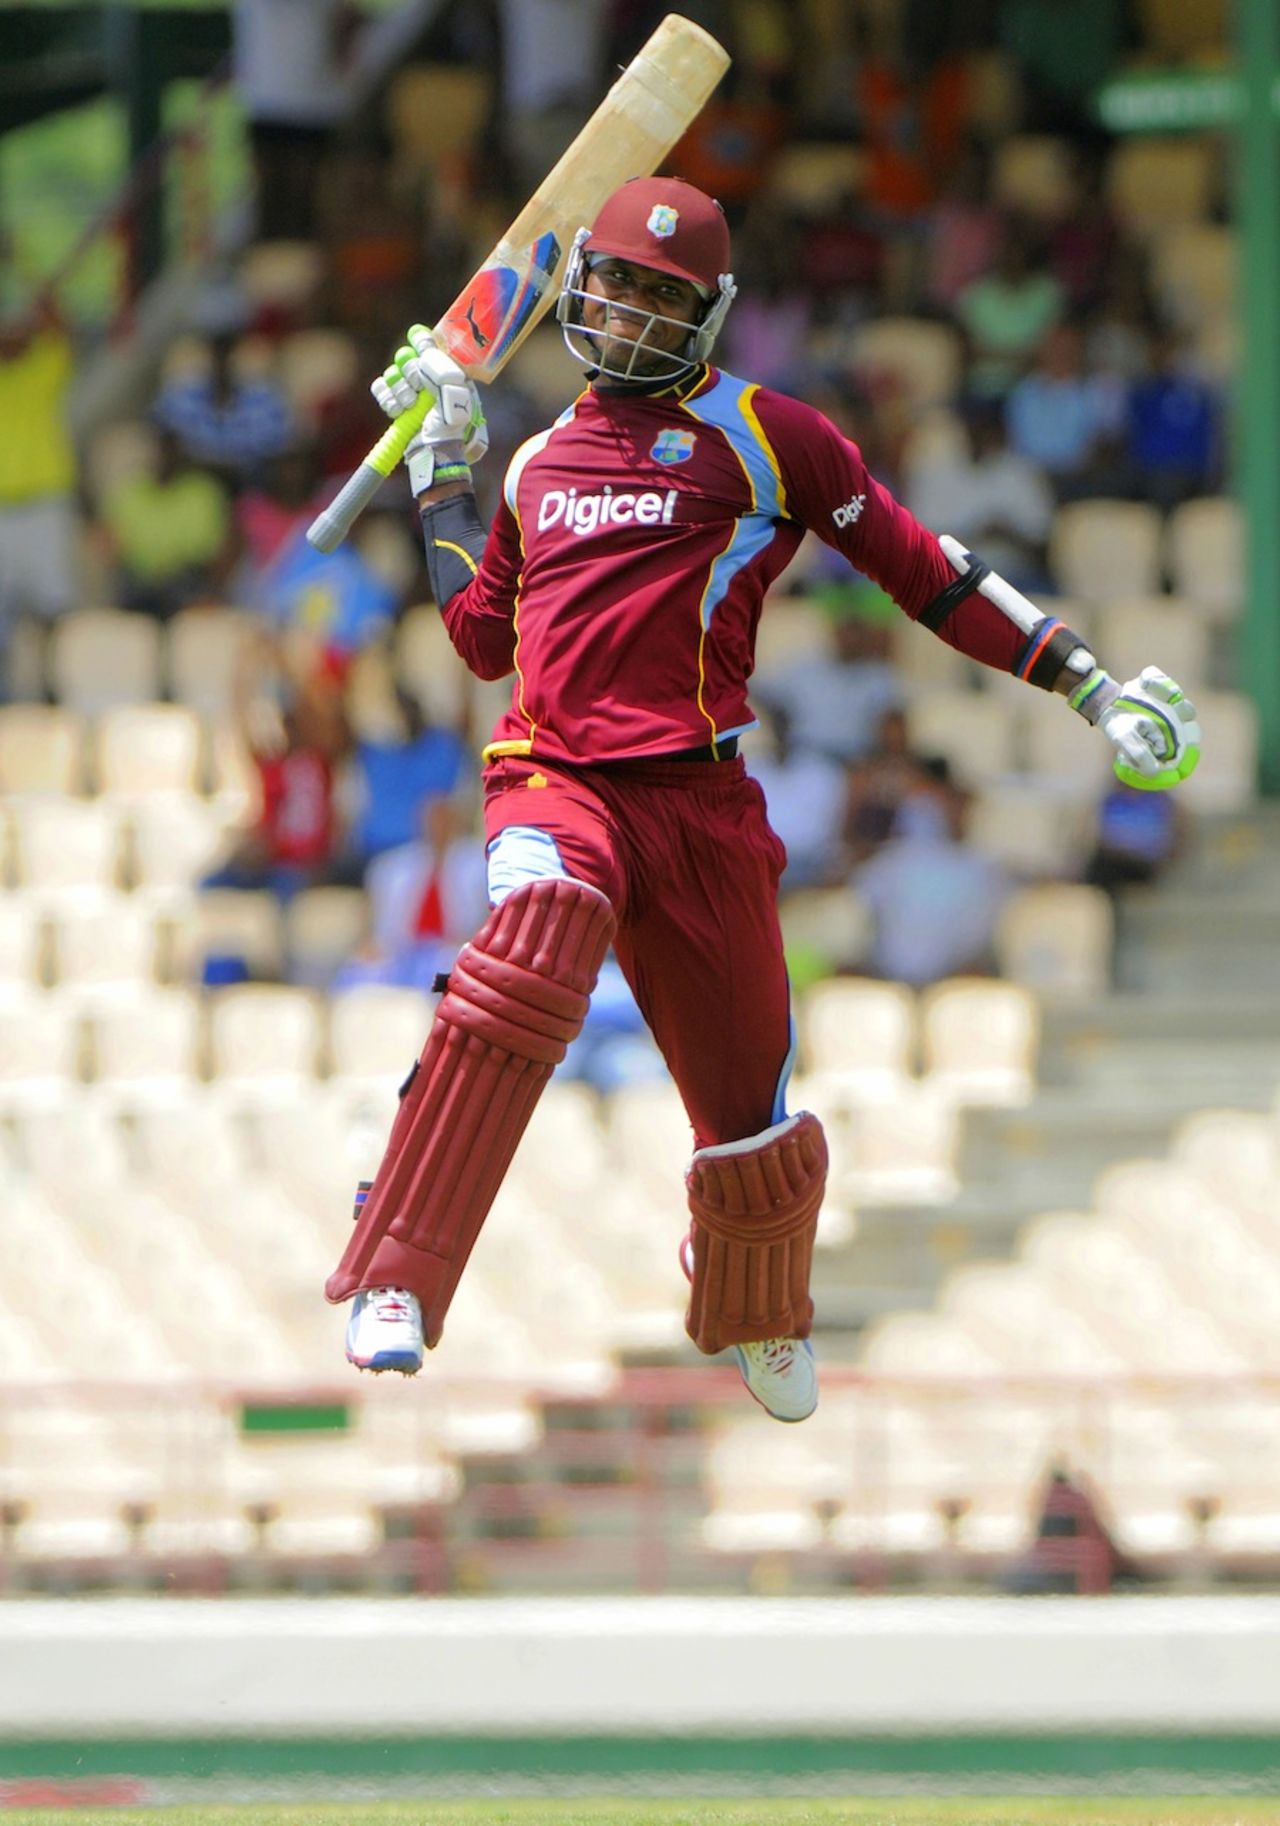 Marlon Samuels is ecstatic after getting to his century, West Indies v Pakistan, 4th ODI, St Lucia, July 21, 2013